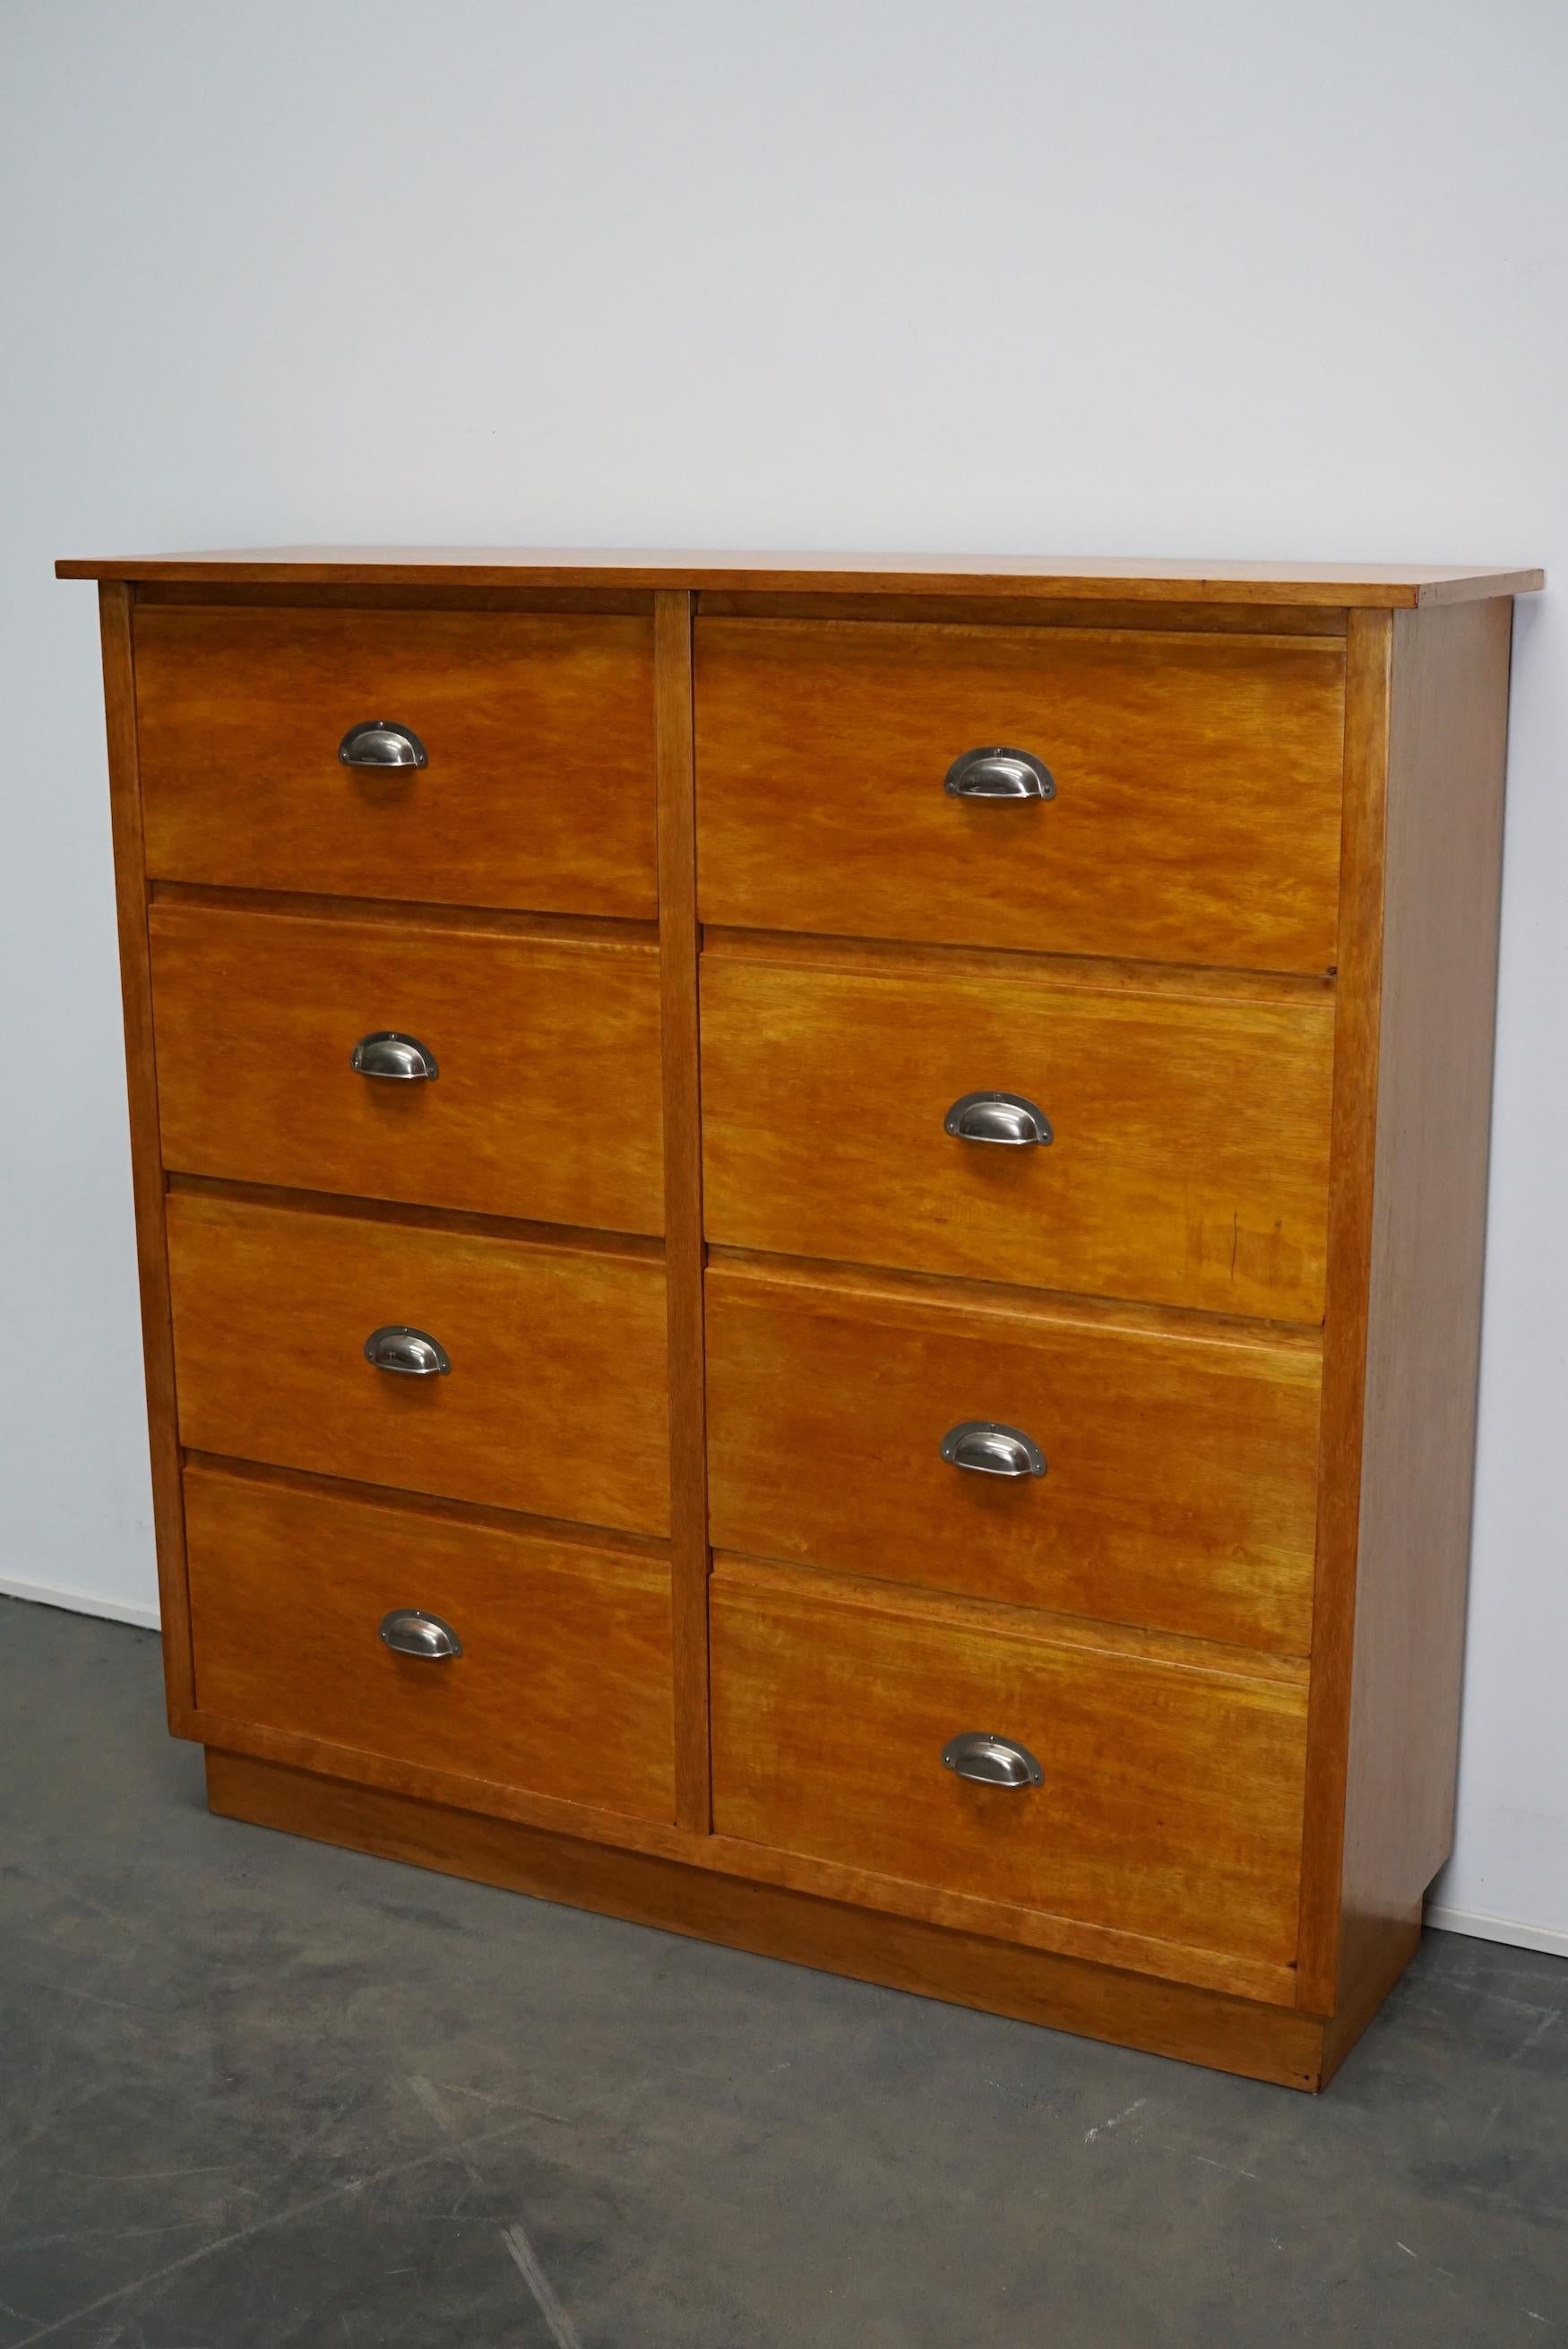 This apothecary with large drawers was made circa 1950s in Germany. It features 8 drawers with sheet metal cup handles. It remains in a good restored condition. The interior dimensions of the drawers are: D x W x H: 28 x 50 x 23 cm.